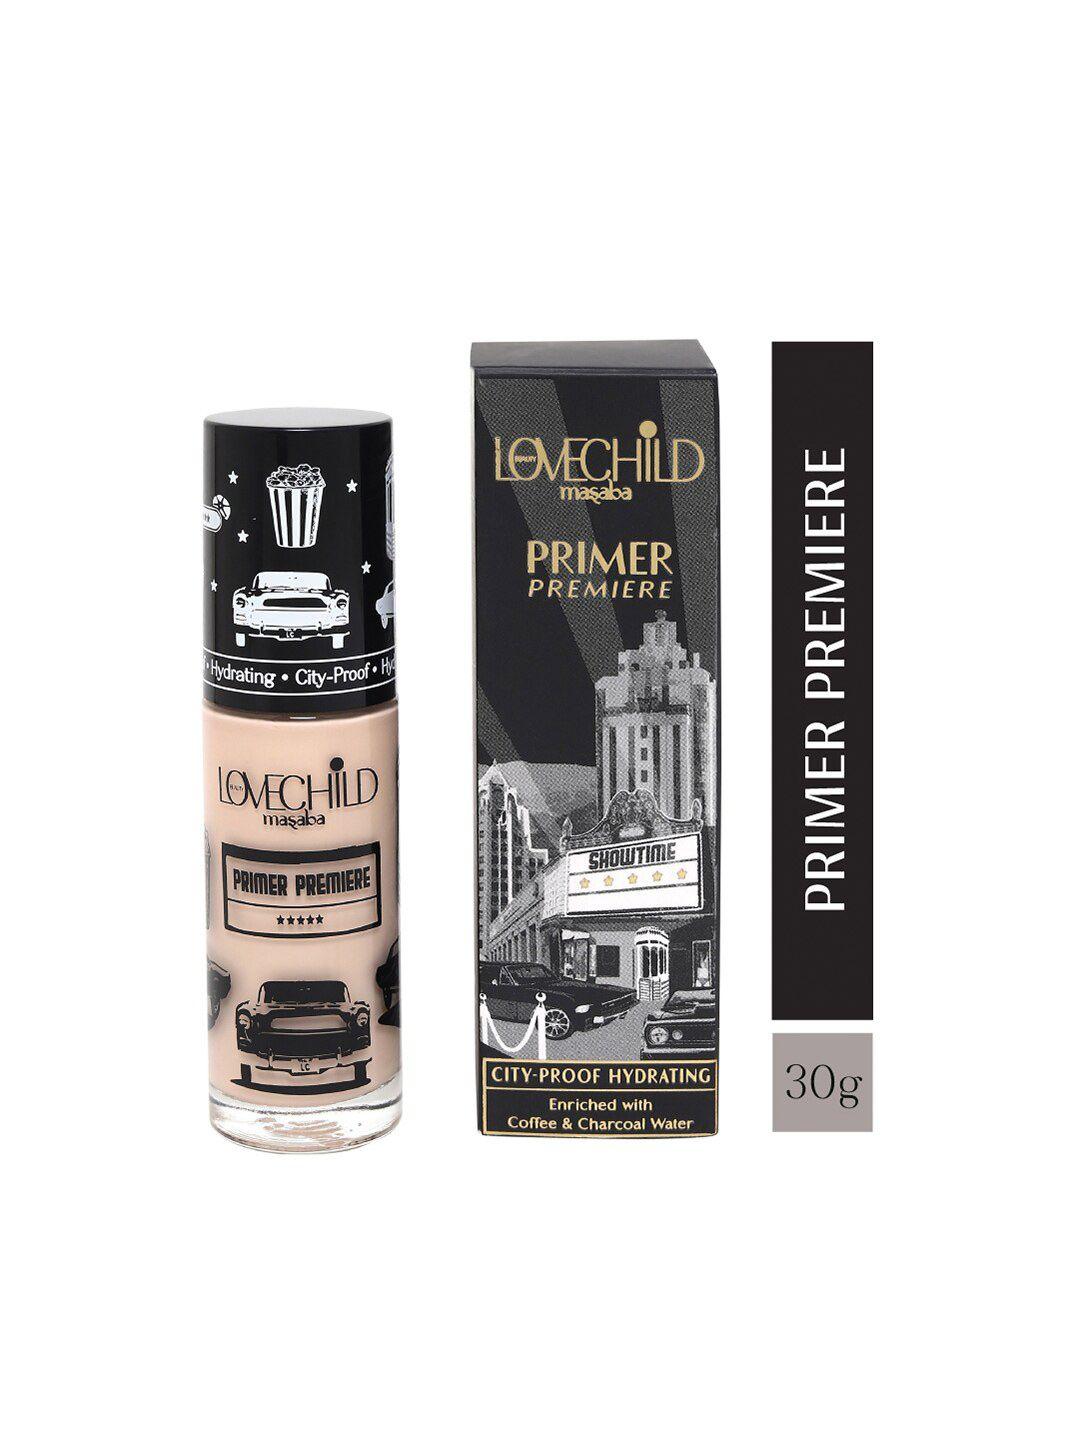 lovechild masaba city-proof hydrating primer premiere with coffee & charcoal - 30g